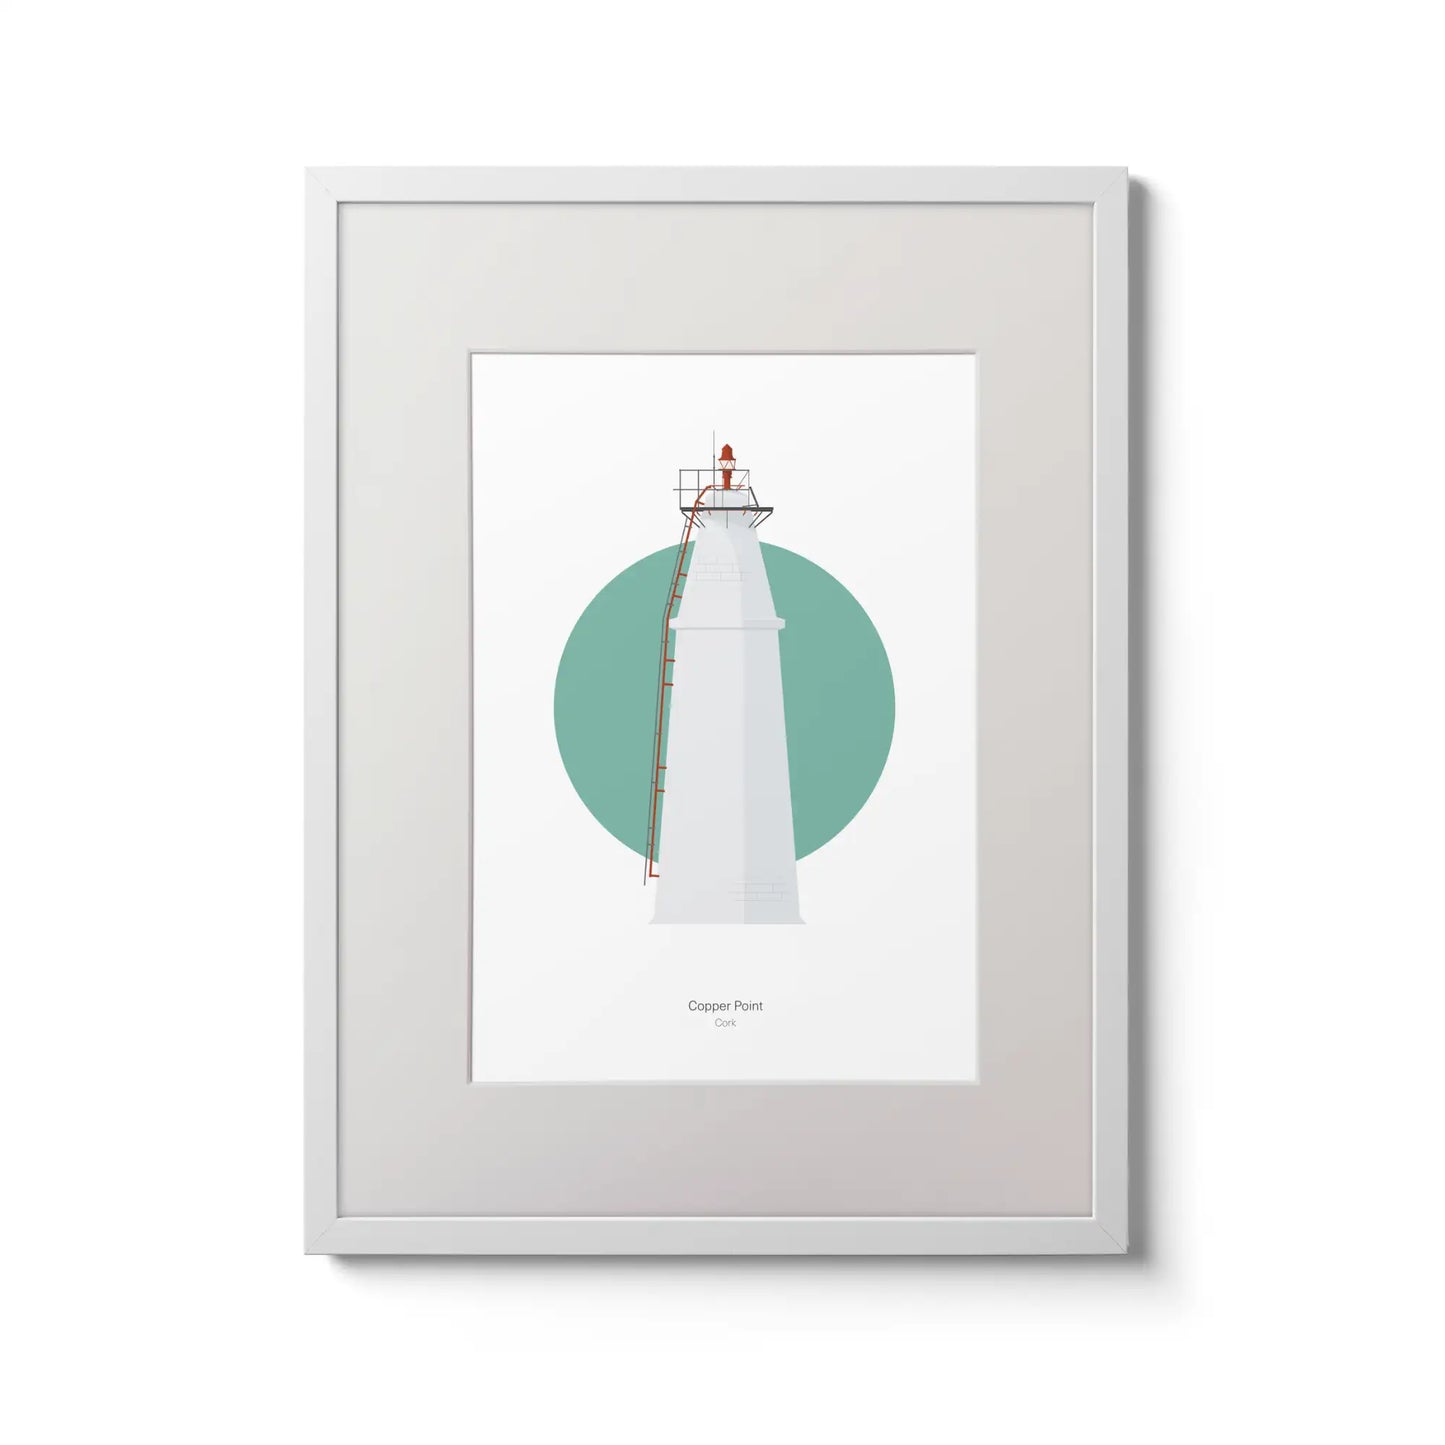 Contemporary wall art decor of Copper Point lighthouse on a white background inside light blue square,  in a white frame measuring 30x40cm.